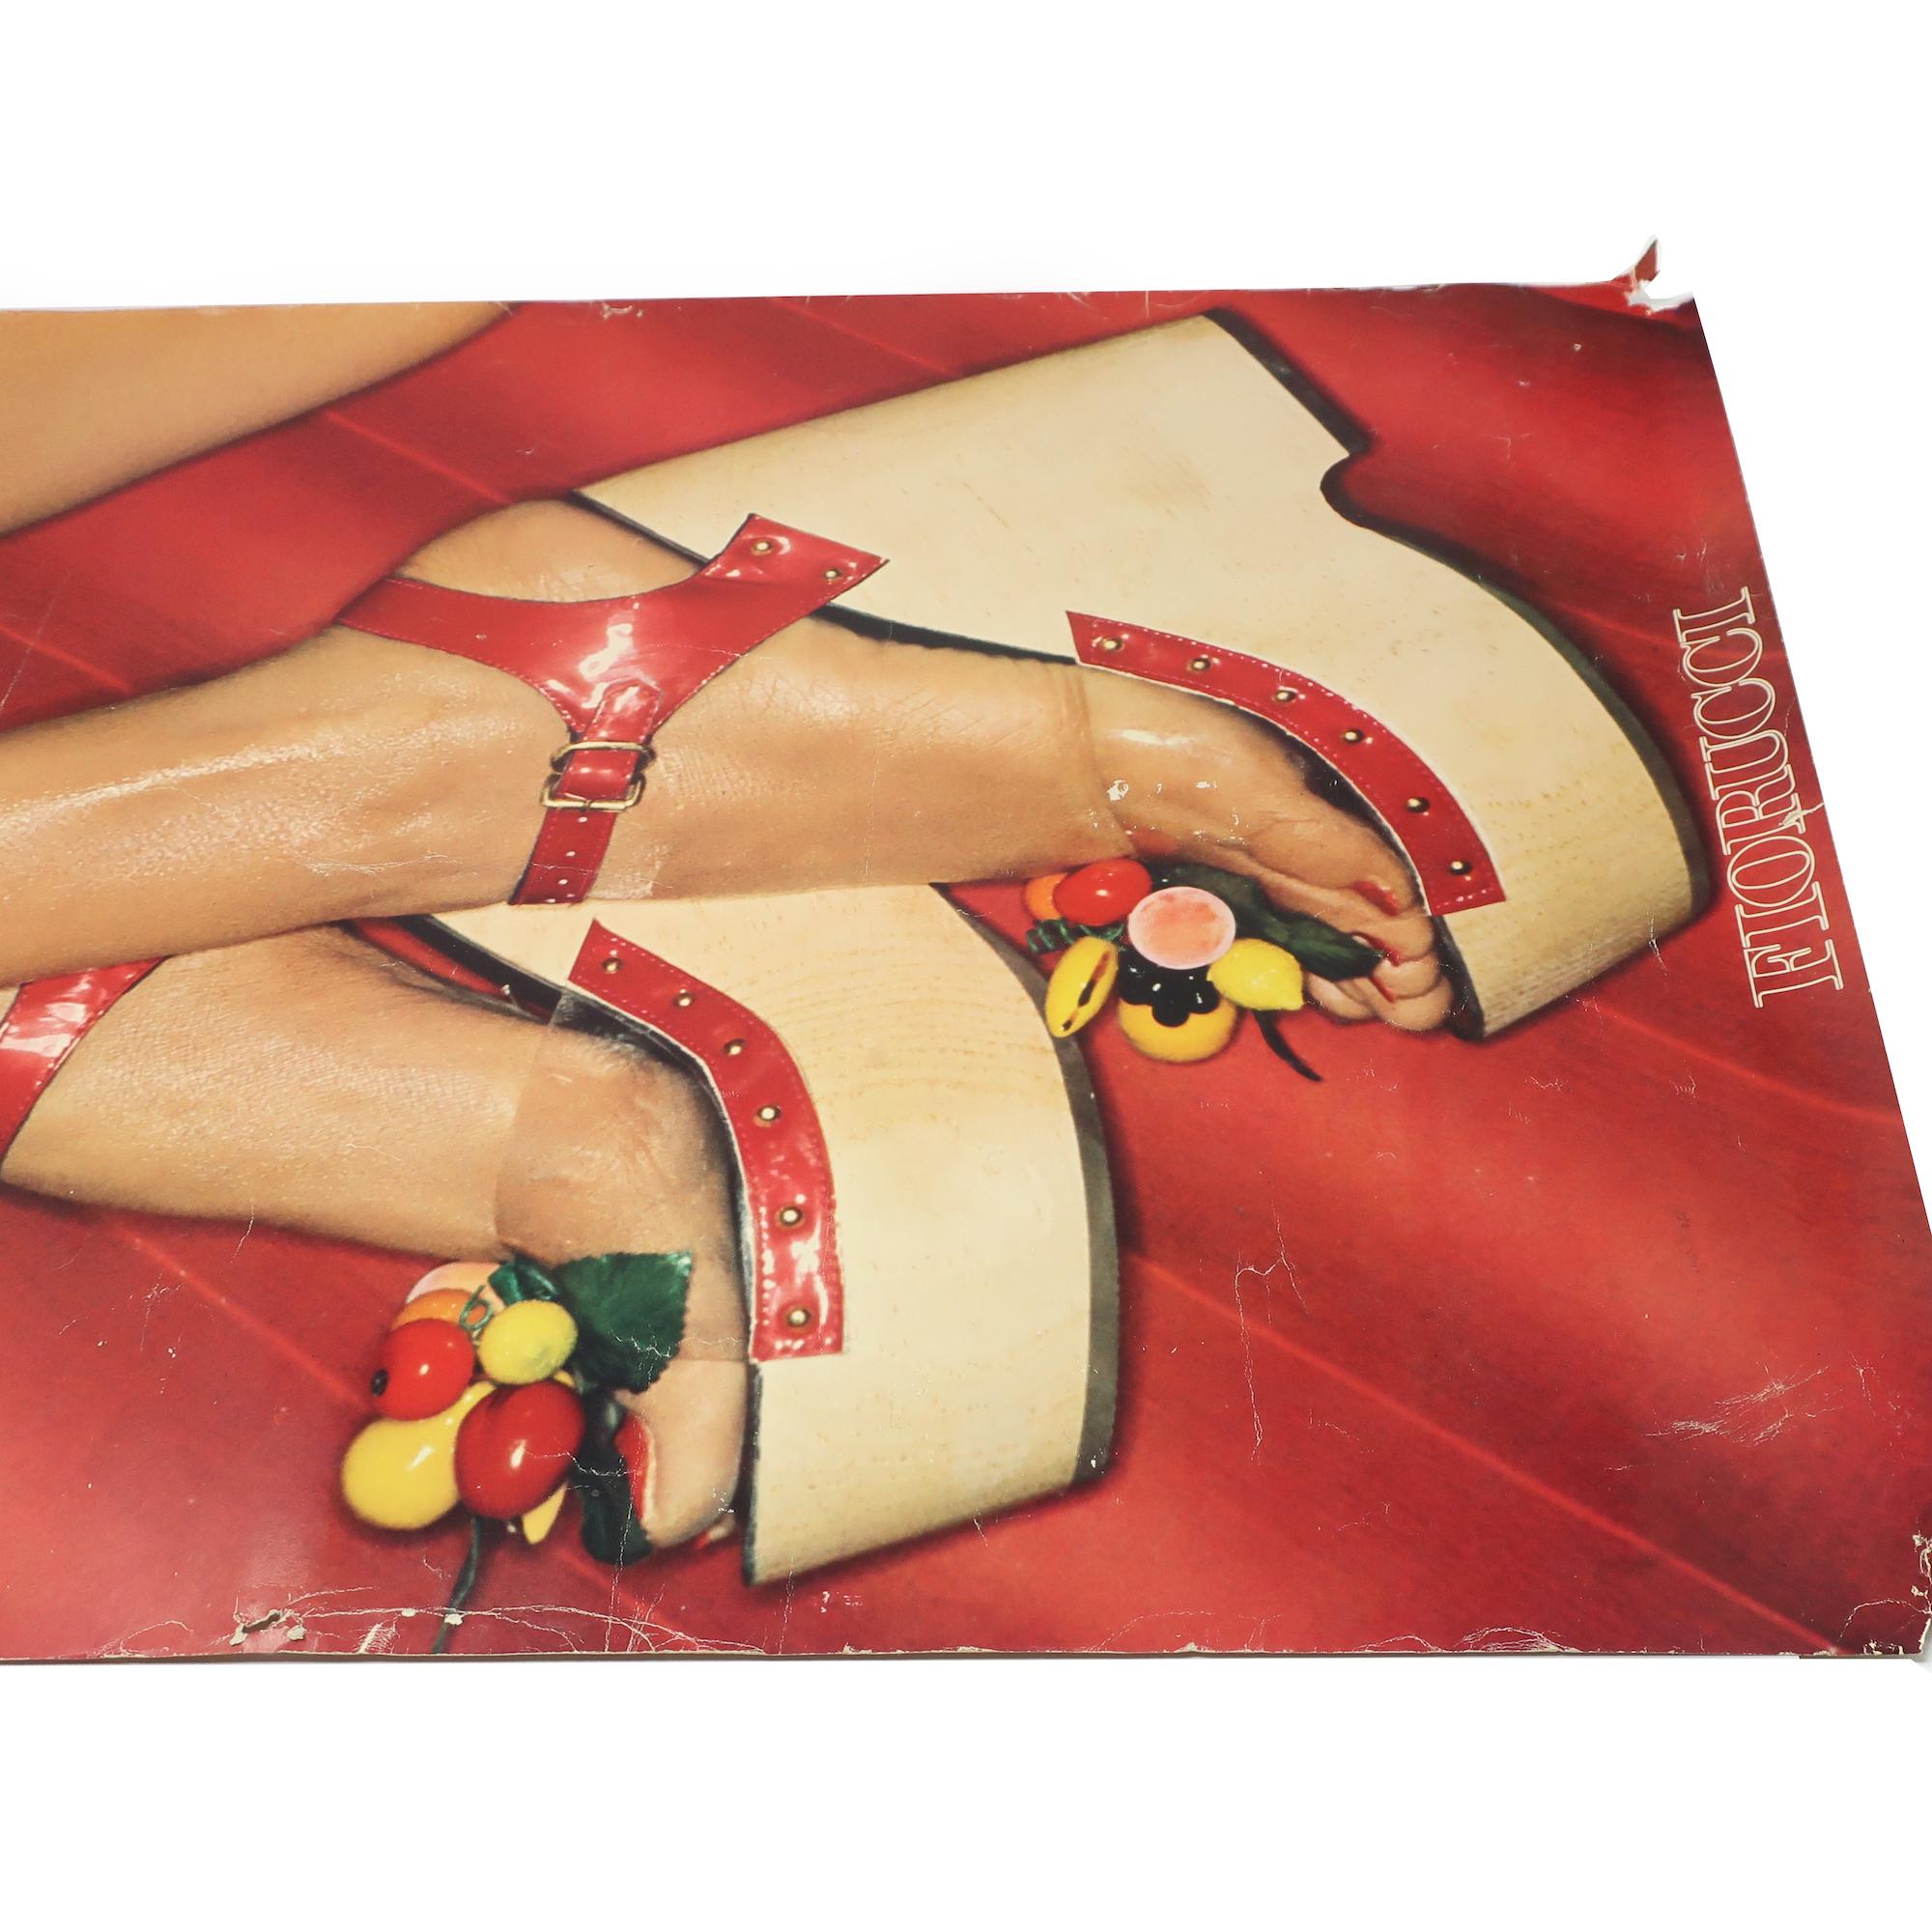 Vintage Fiorucci Wedge Sandals Poster 1978 In Fair Condition For Sale In Brooklyn, NY